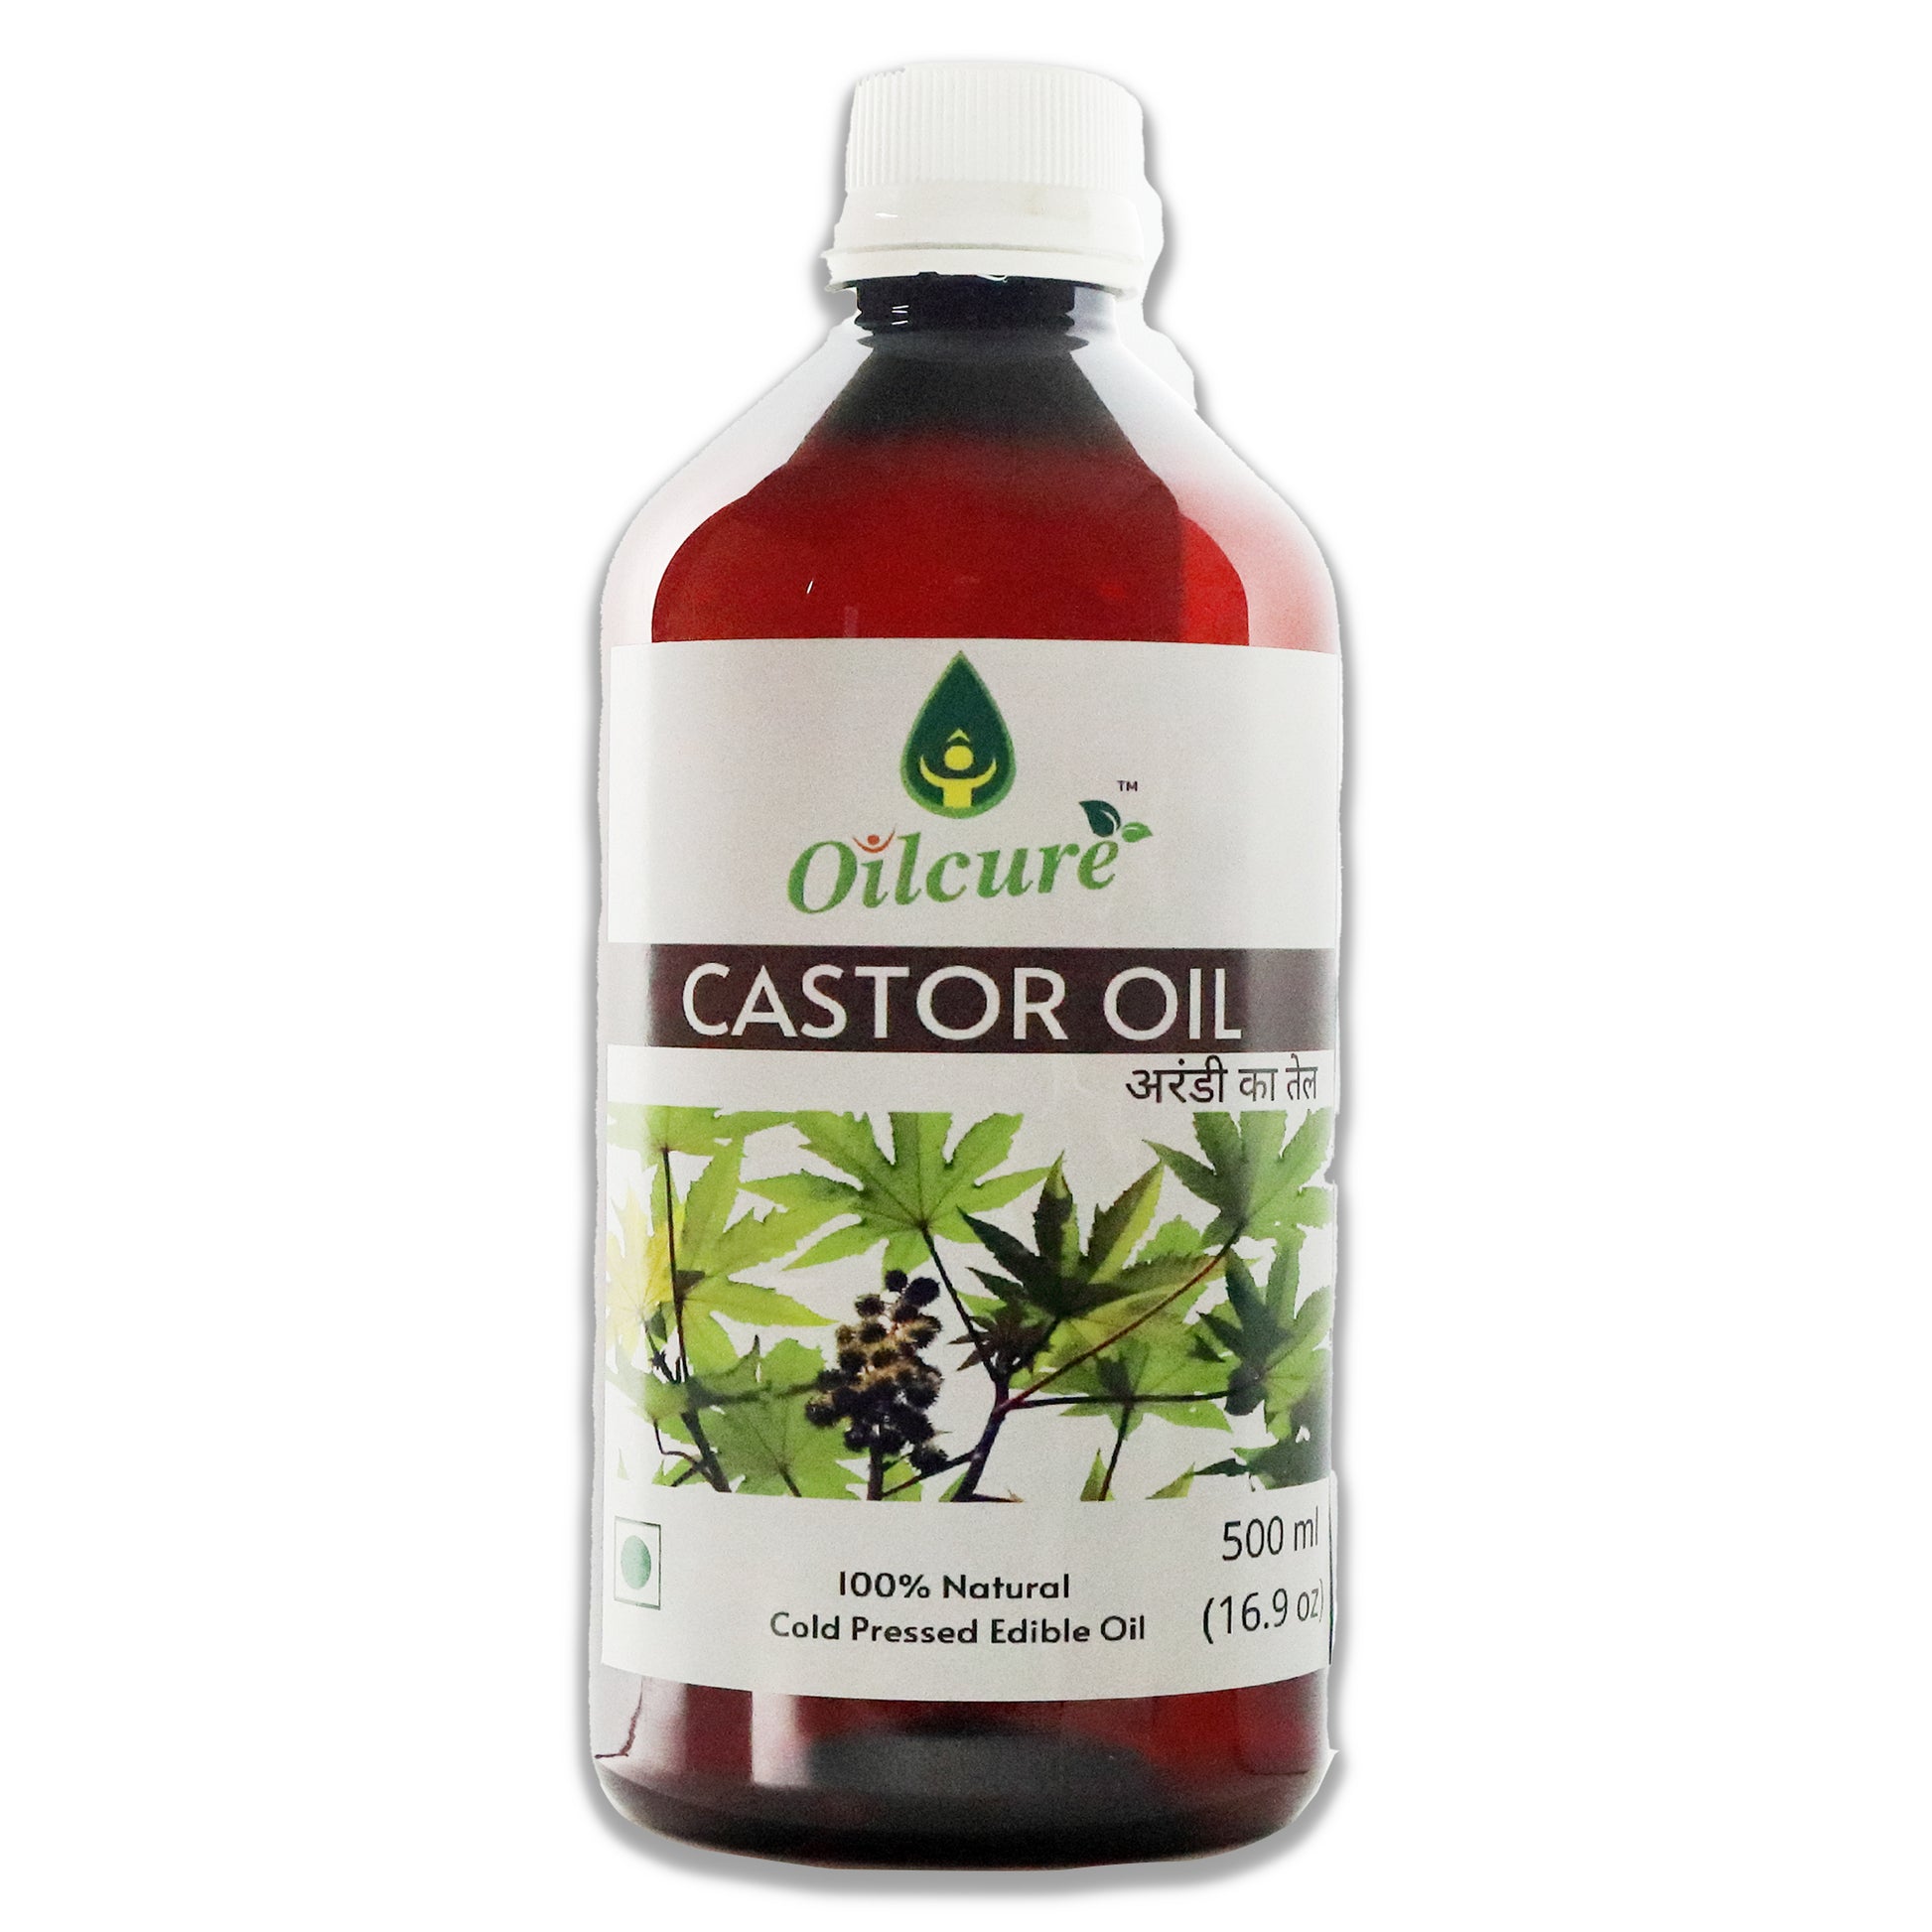 Oilcure Cold-pressed castor oil is a natural oil that is extracted from the seeds of the castor plant.